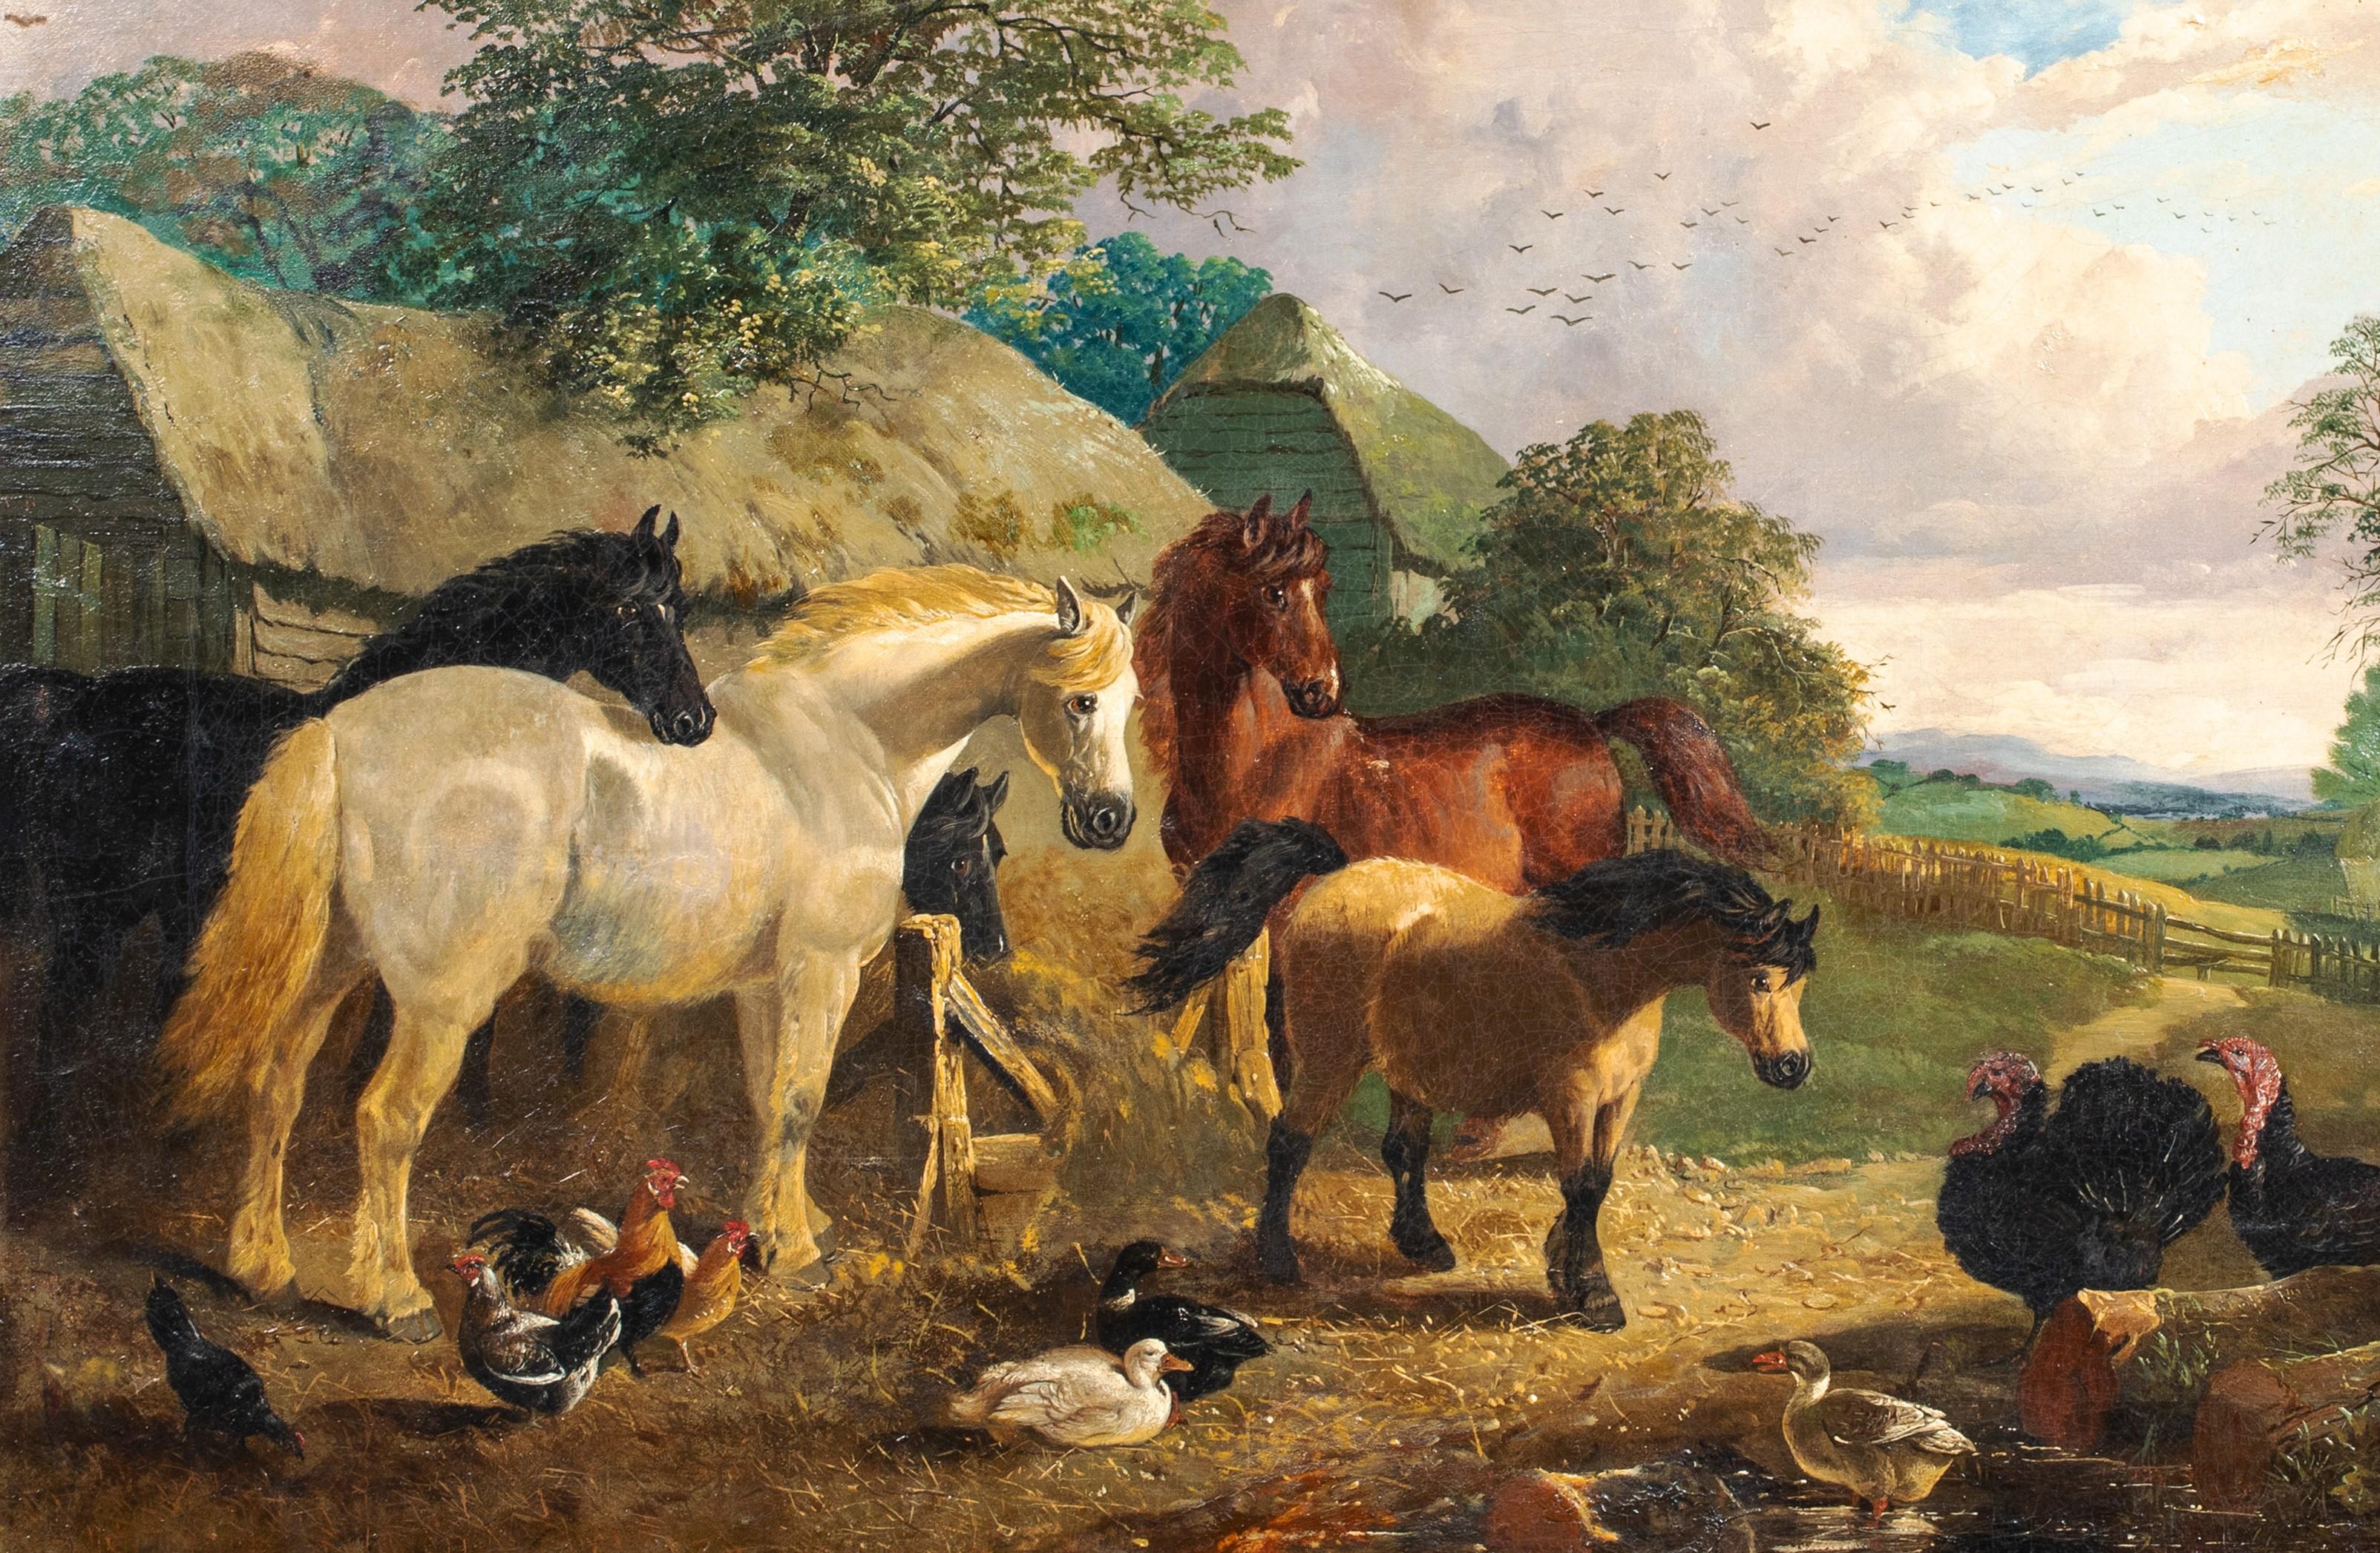 The Farmyard, 19th Century

attributed John Frederick HERRING (1815-1907)

Large 19th Century English Farmyard scene with horses, ducks, chickens and turkeys, oil on canvas. Excellent quality and condition fam scene typical of Herring Jnr's painting